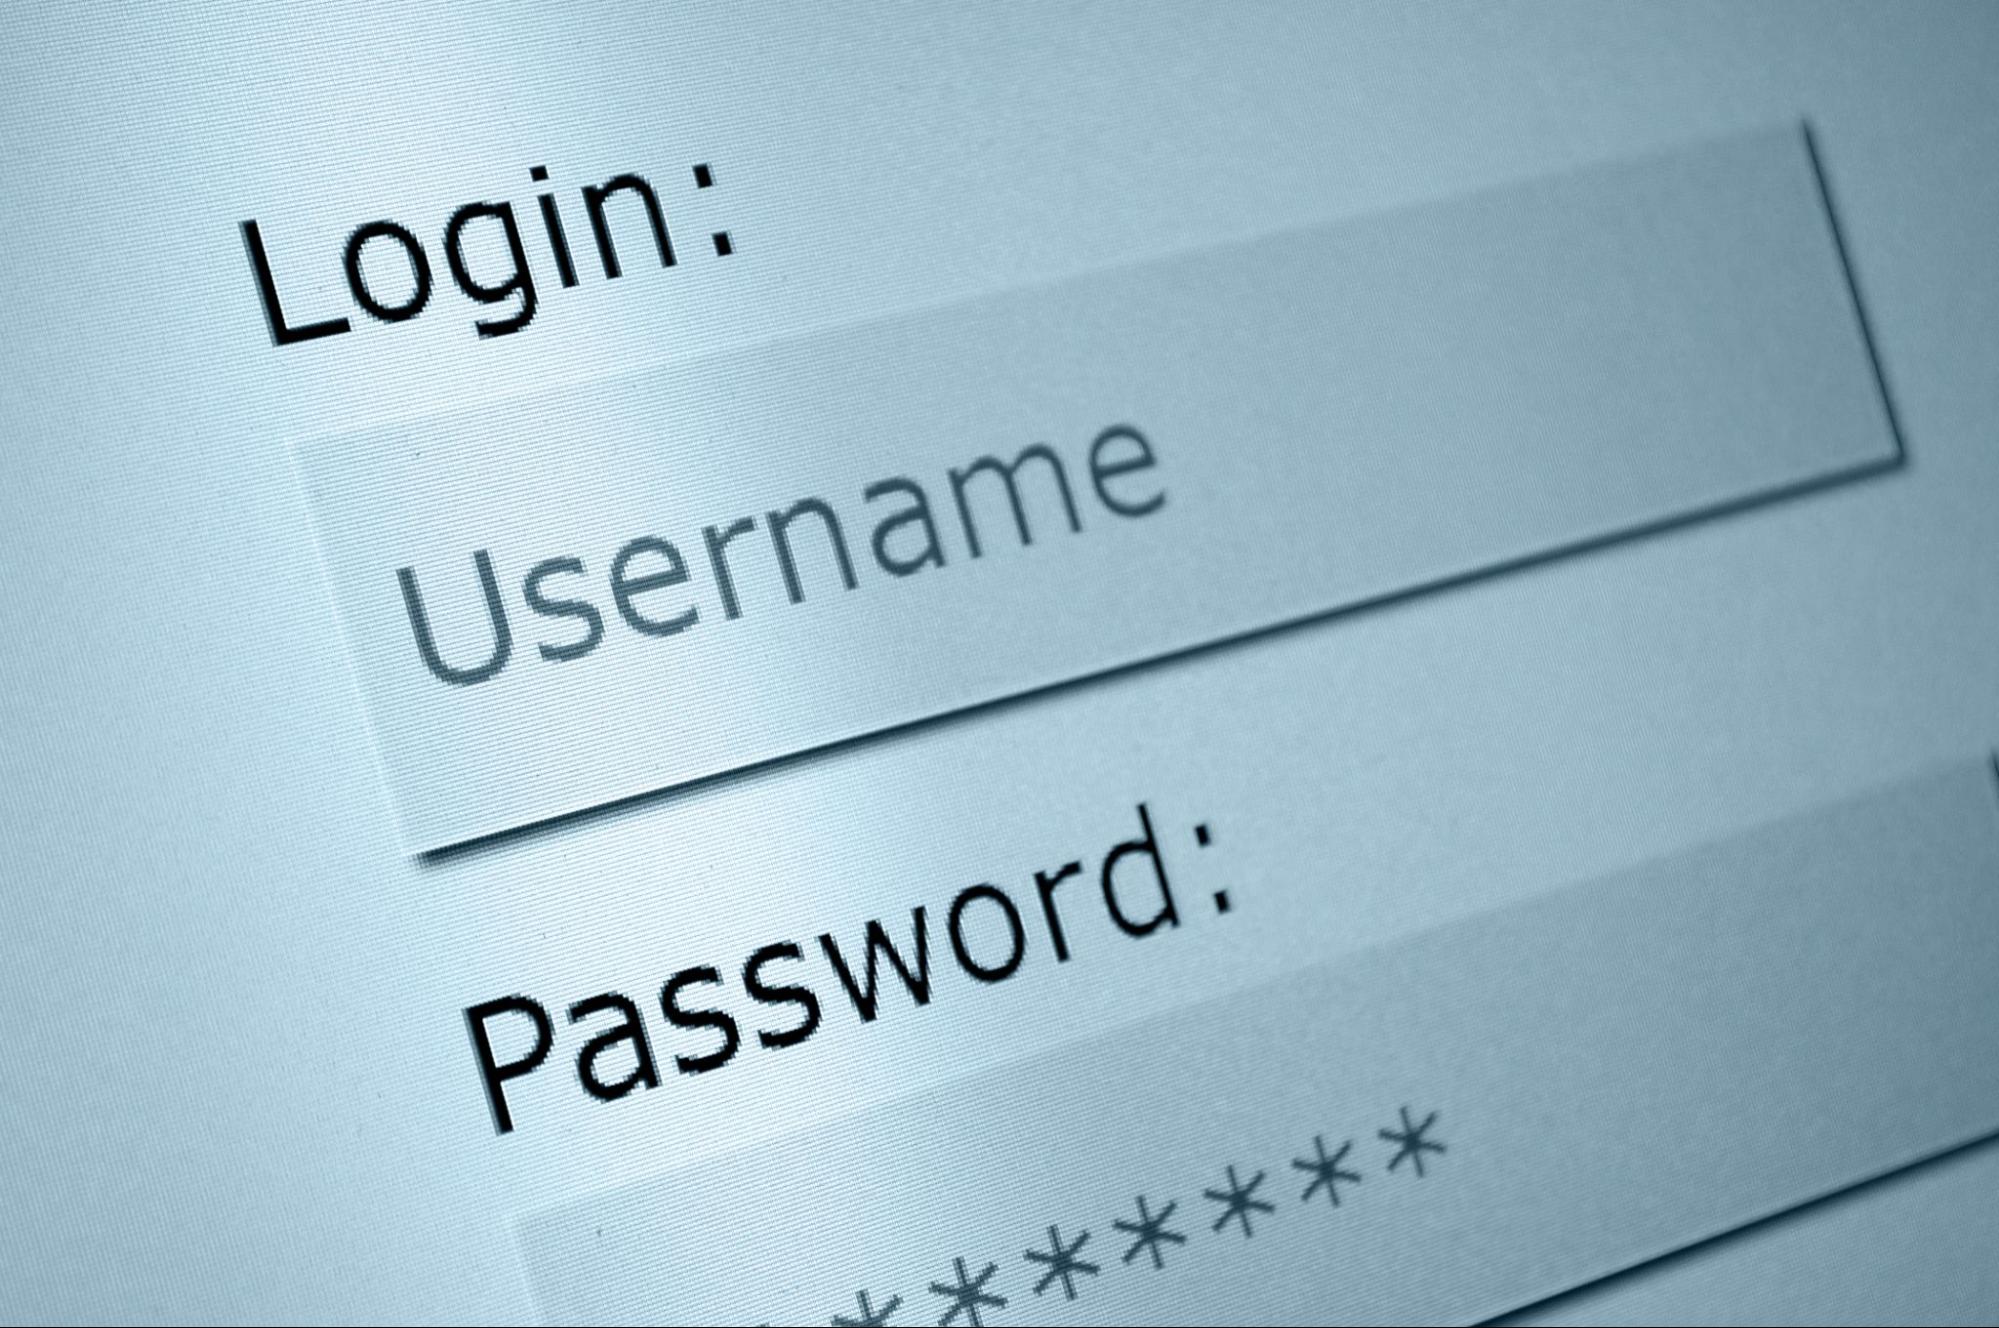 A Very Useful Article About Online Passwords